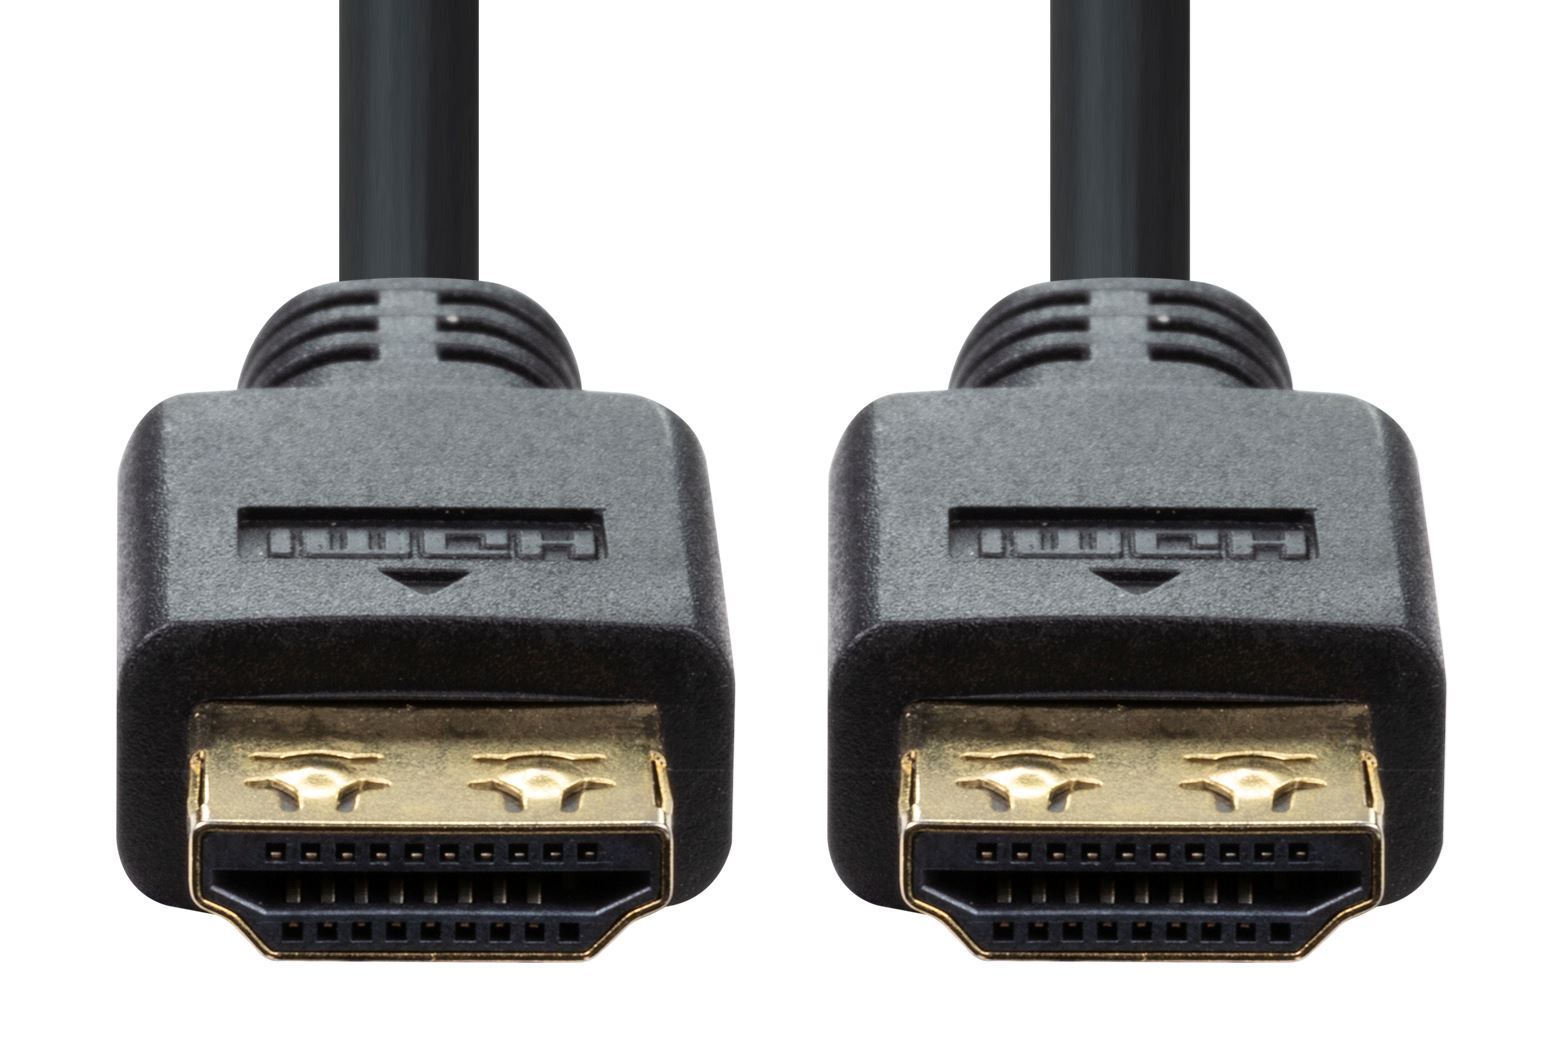 DYNAMIX_1m_HDMI_High_Speed_18Gbps_Flexi_Lock_Cable_with_Ethernet._Max_Res:_4K2K@30/60Hz._32_Audio_channels._10/12bit_colour_depth._Supports_CEC_2.0,_3D,_ARC,_Ethernet_2x_simultaneous_video_streams. 707